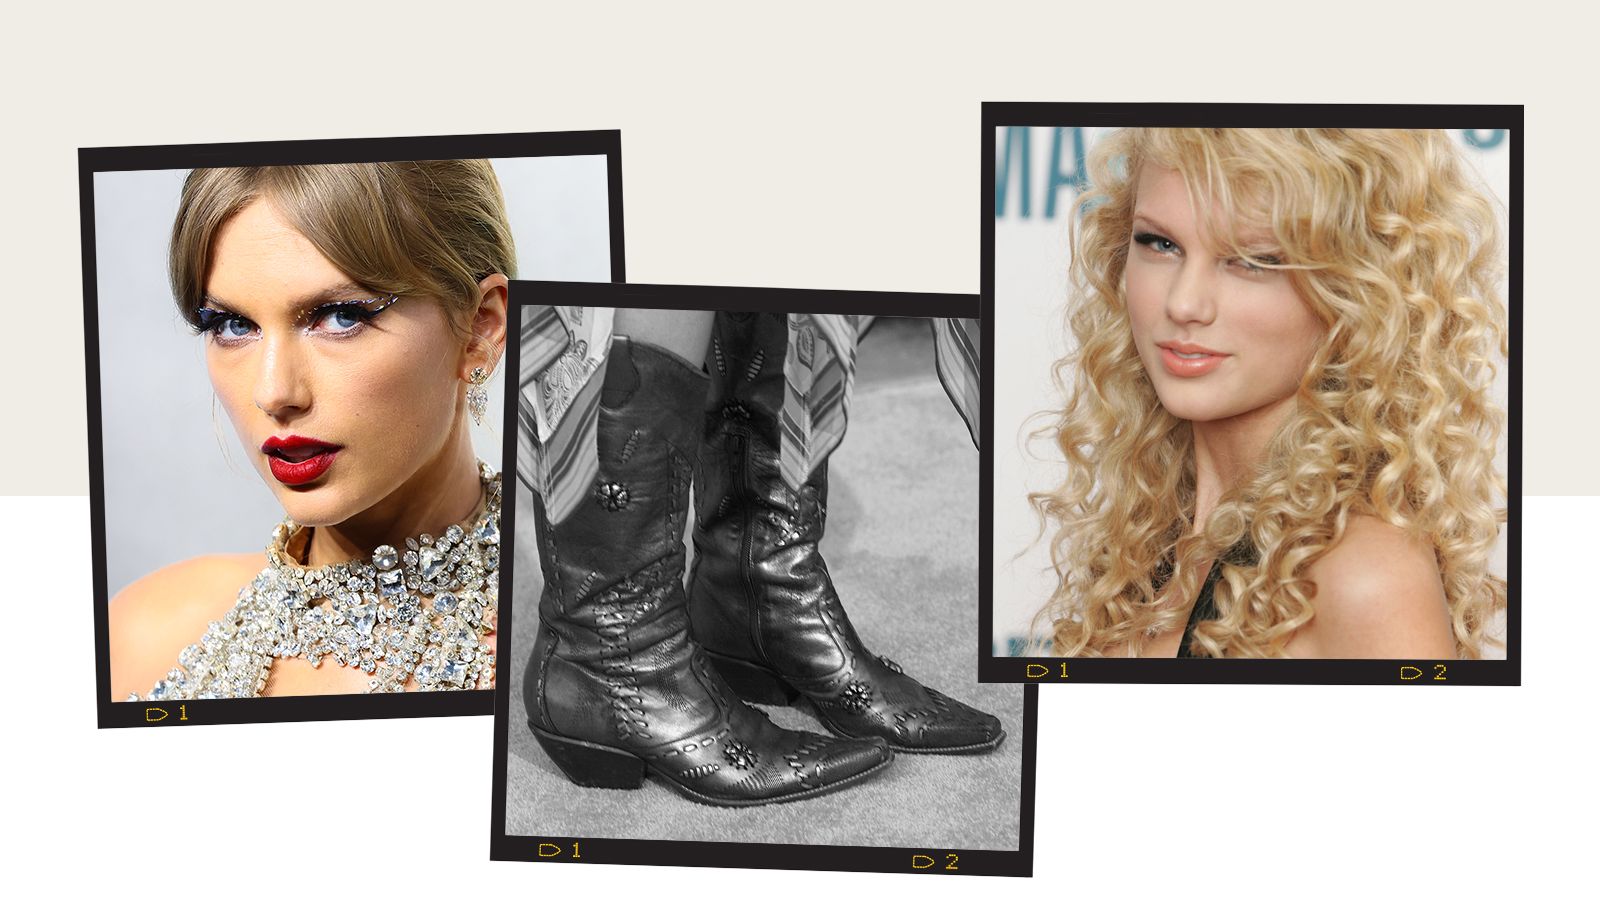 Taylor Swift 10 Most Unknown Facts That will Shocked You